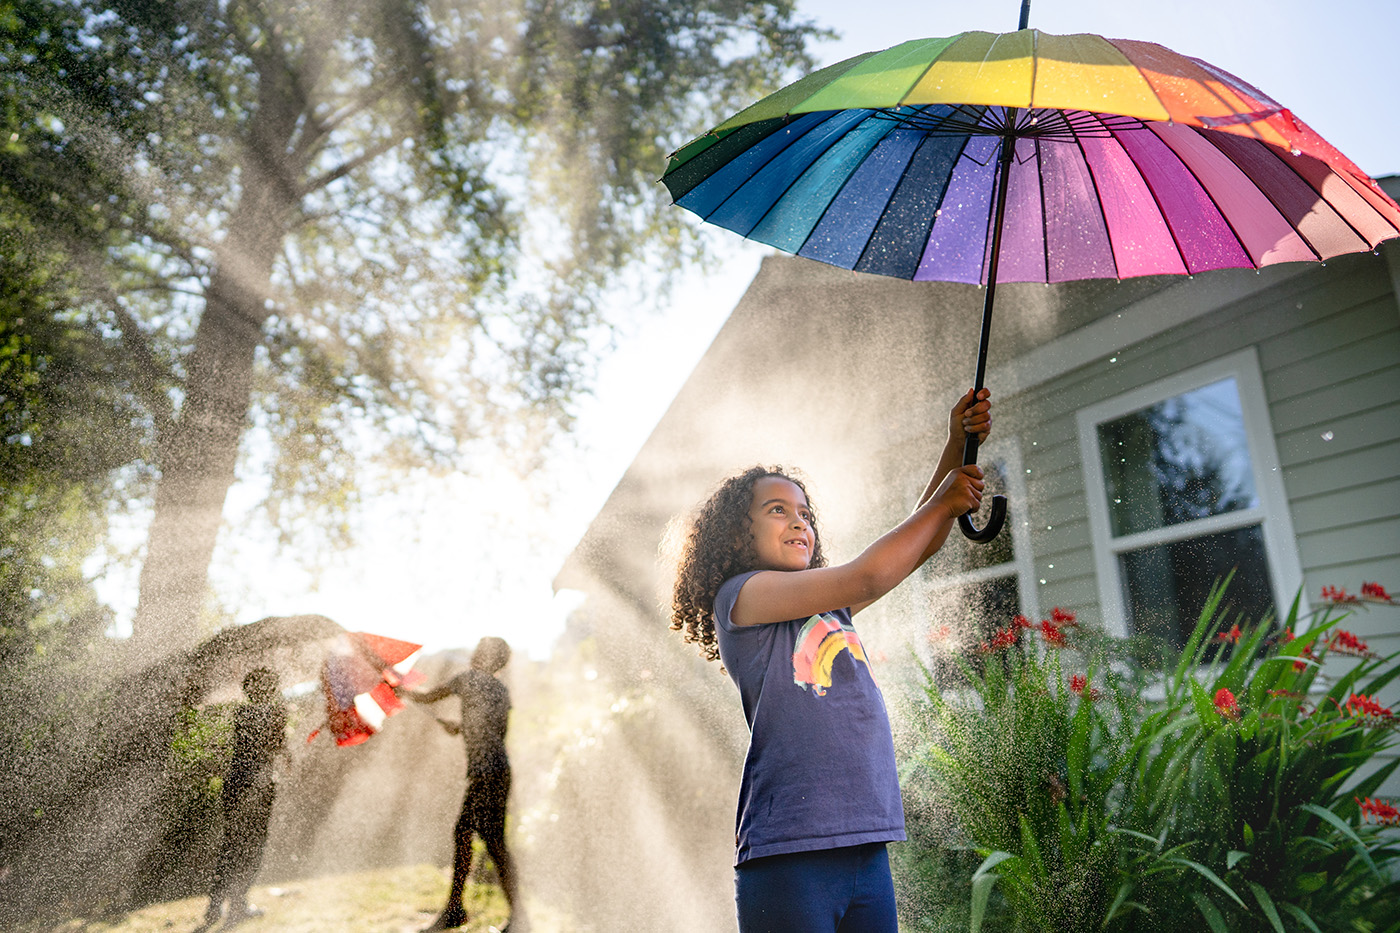 Curly haired girl holds rainbow umbrella aloft while two figures with umbrellas stand in the background. Air is full of water spray but sun is shining.